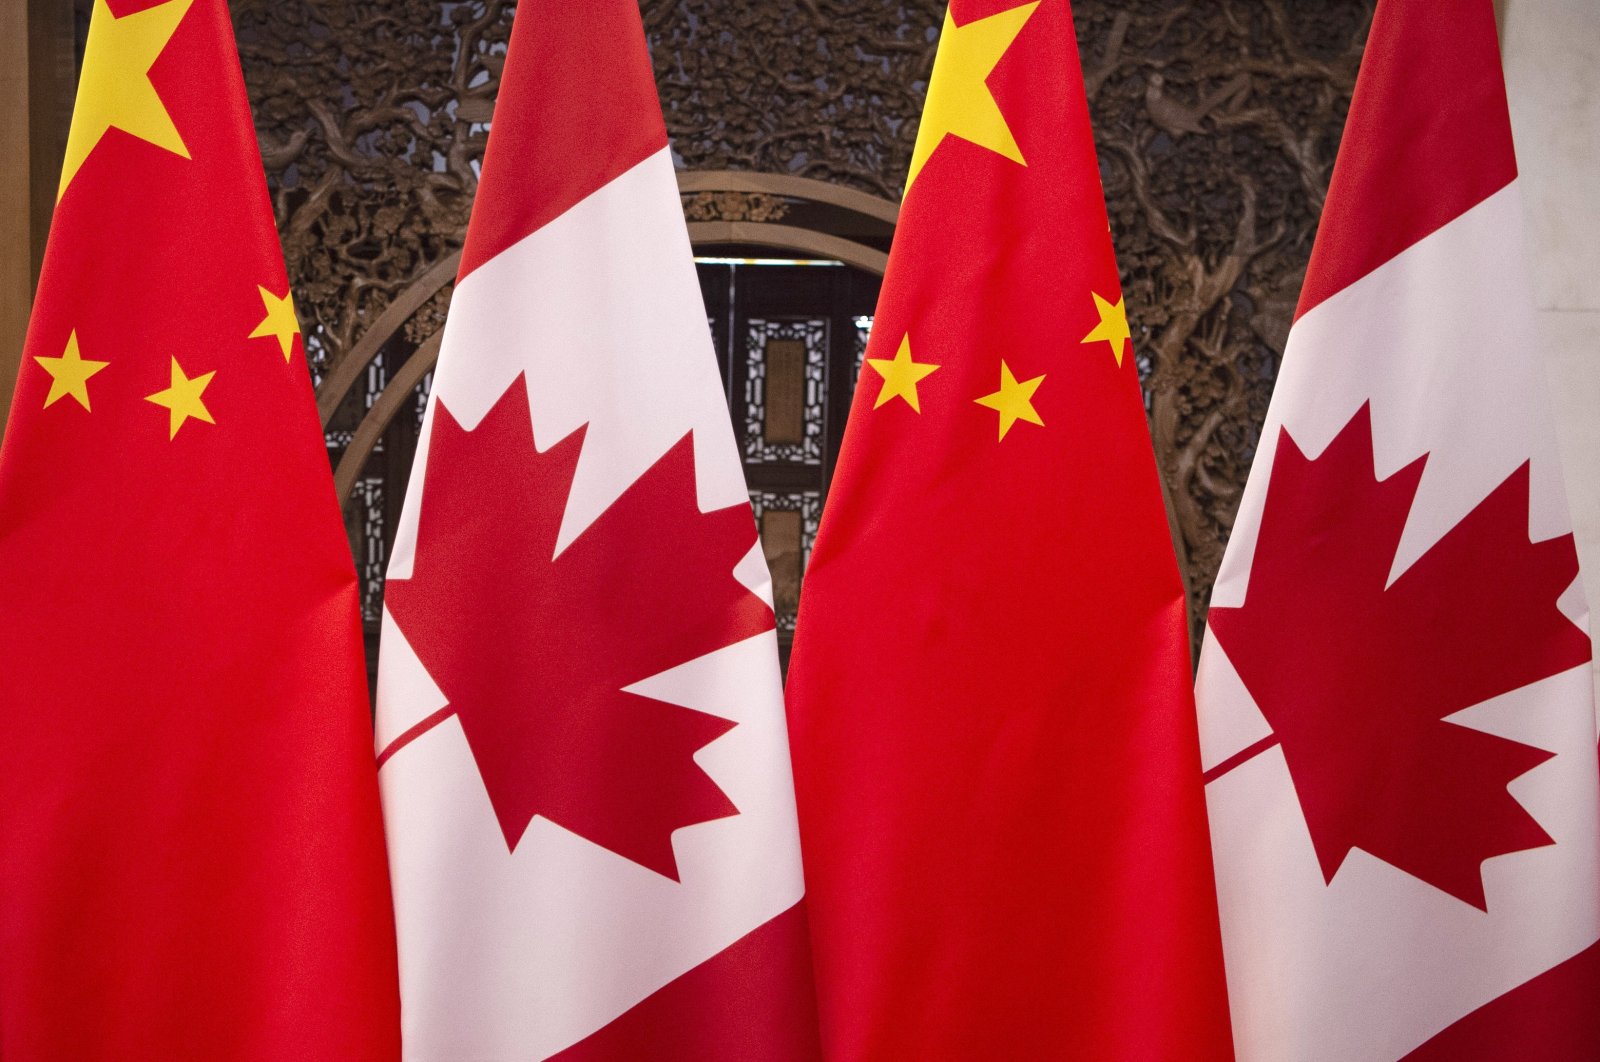 Flags of Canada and China prior to a meeting of Canadian Prime Minister Justin Trudeau and Chinese President Xi Jinping at the Diaoyutai State Guesthouse in Beijing, Dec. 5, 2017. (AP File Photo)